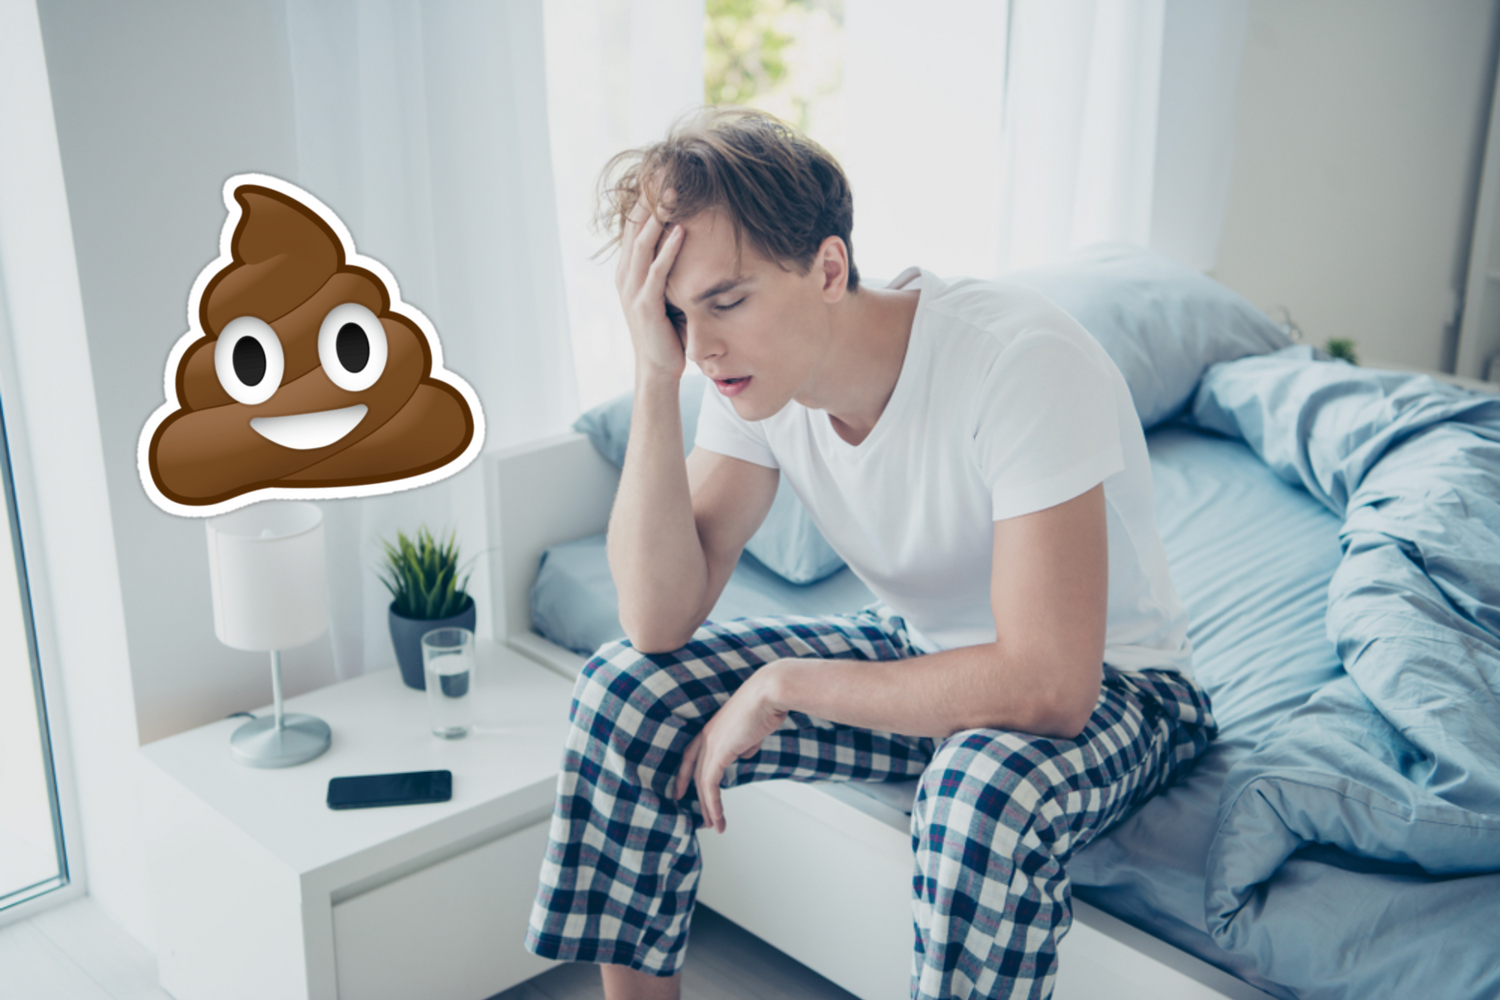 can pooping help hangover